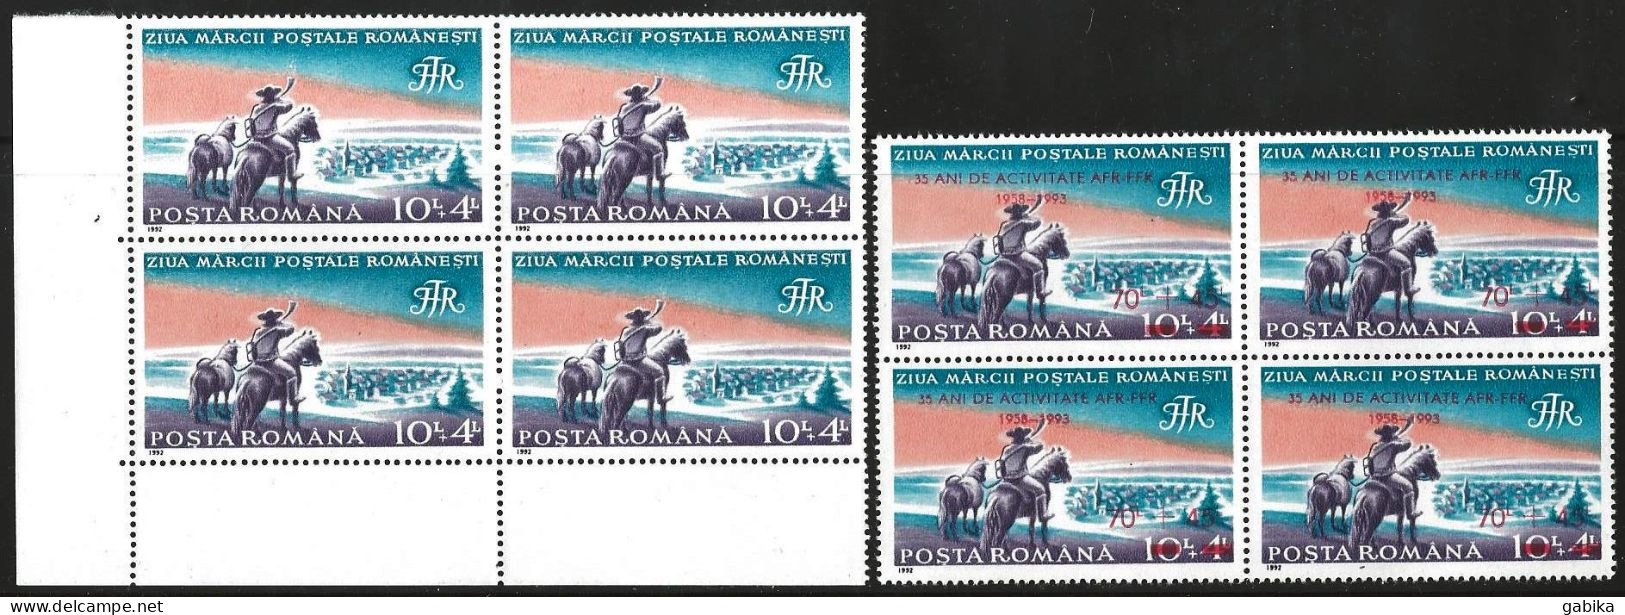 Romania 1992 1993, Scott B458 B460, MNH, Block Of Four, Without And With Overprint, Stamp Day AFR - Nuevos